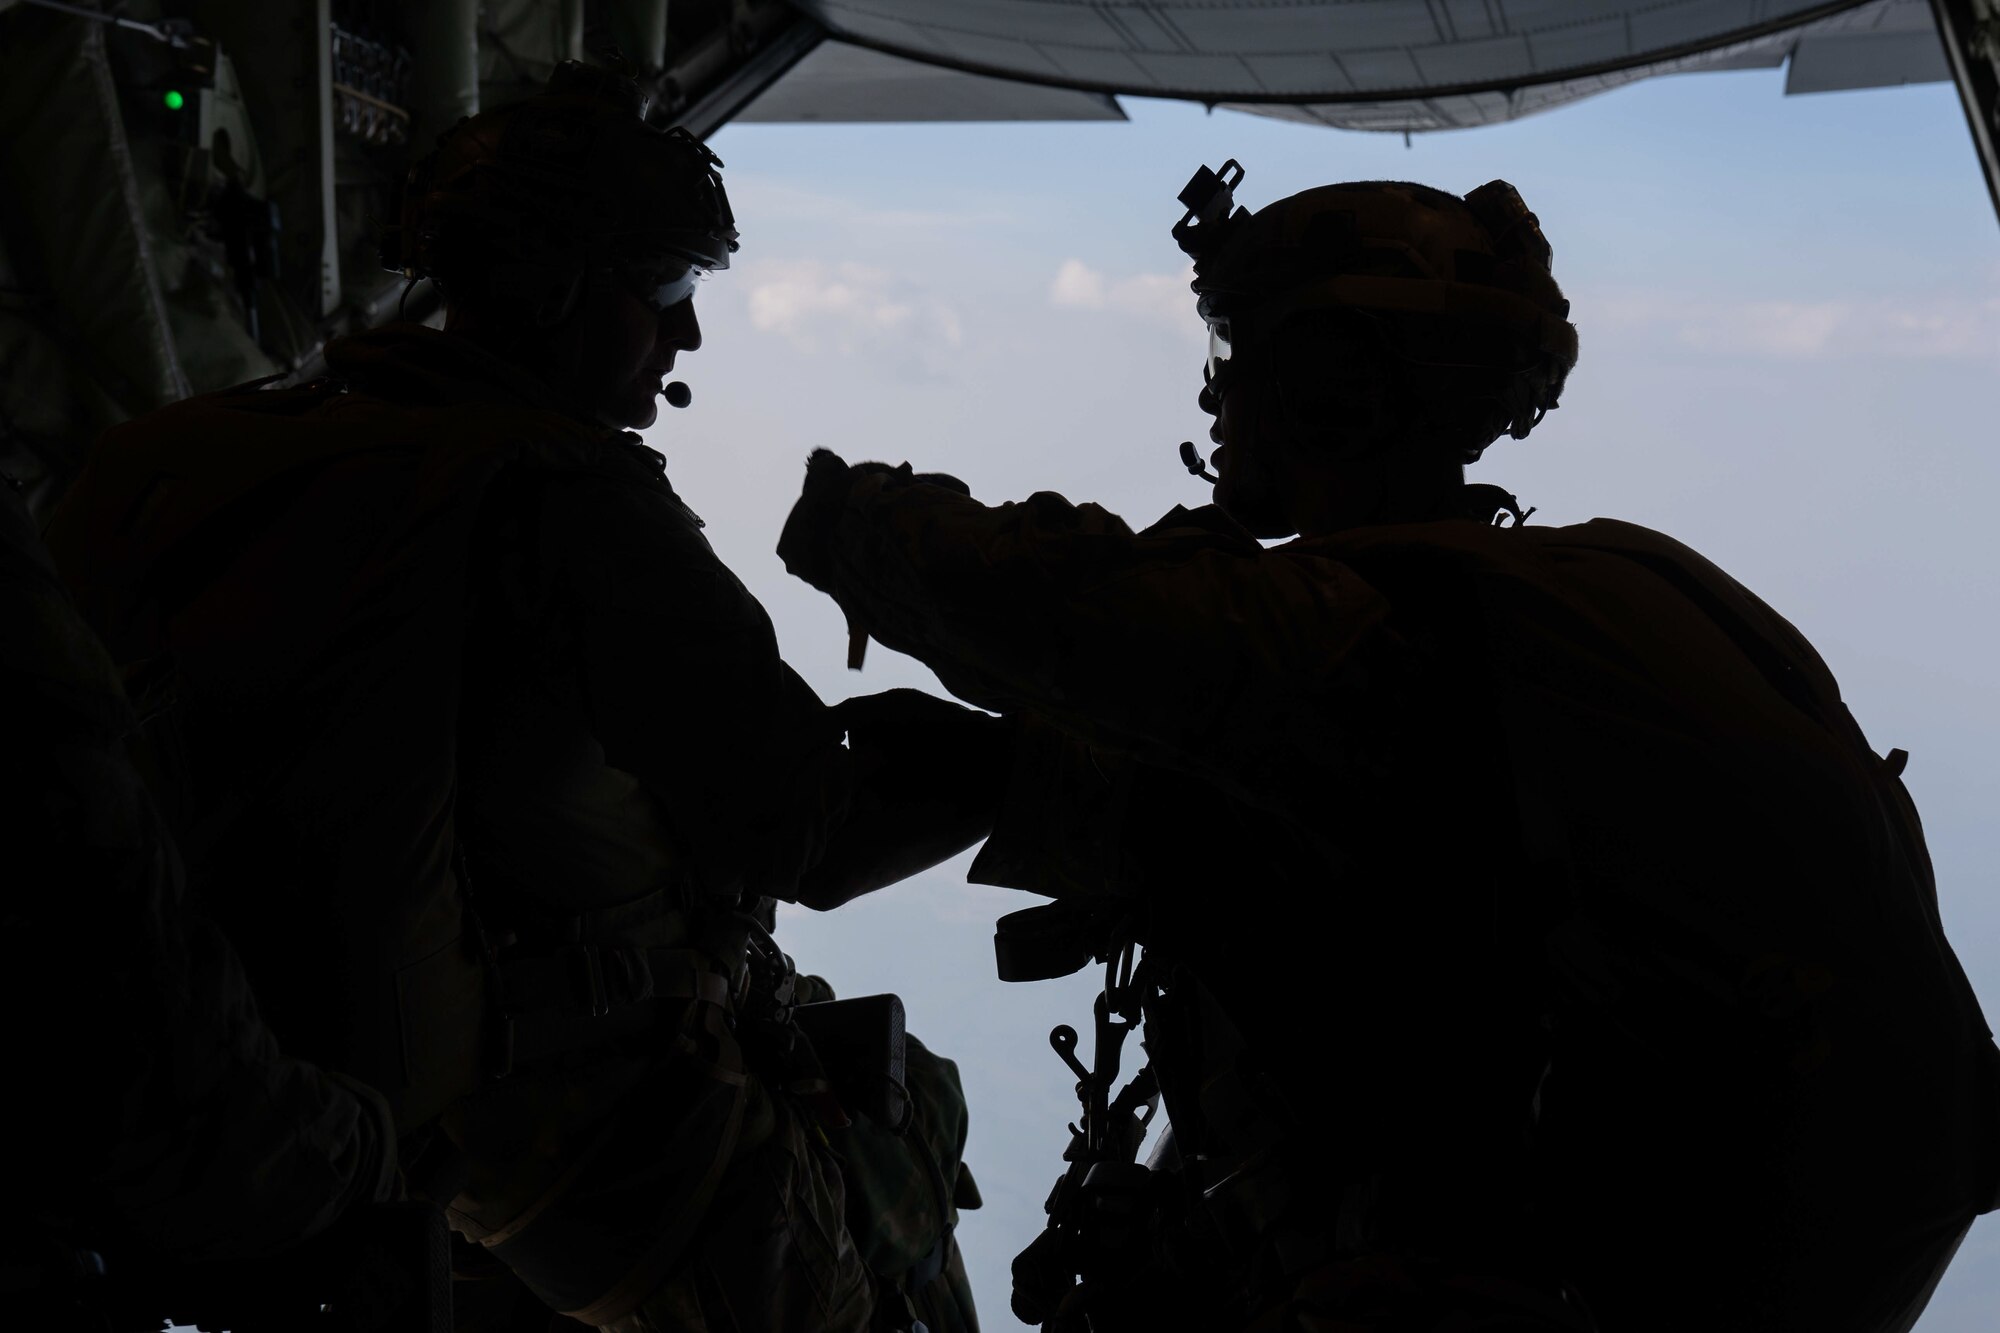 Paratroopers and Special Operations Unit conduct airborne operations